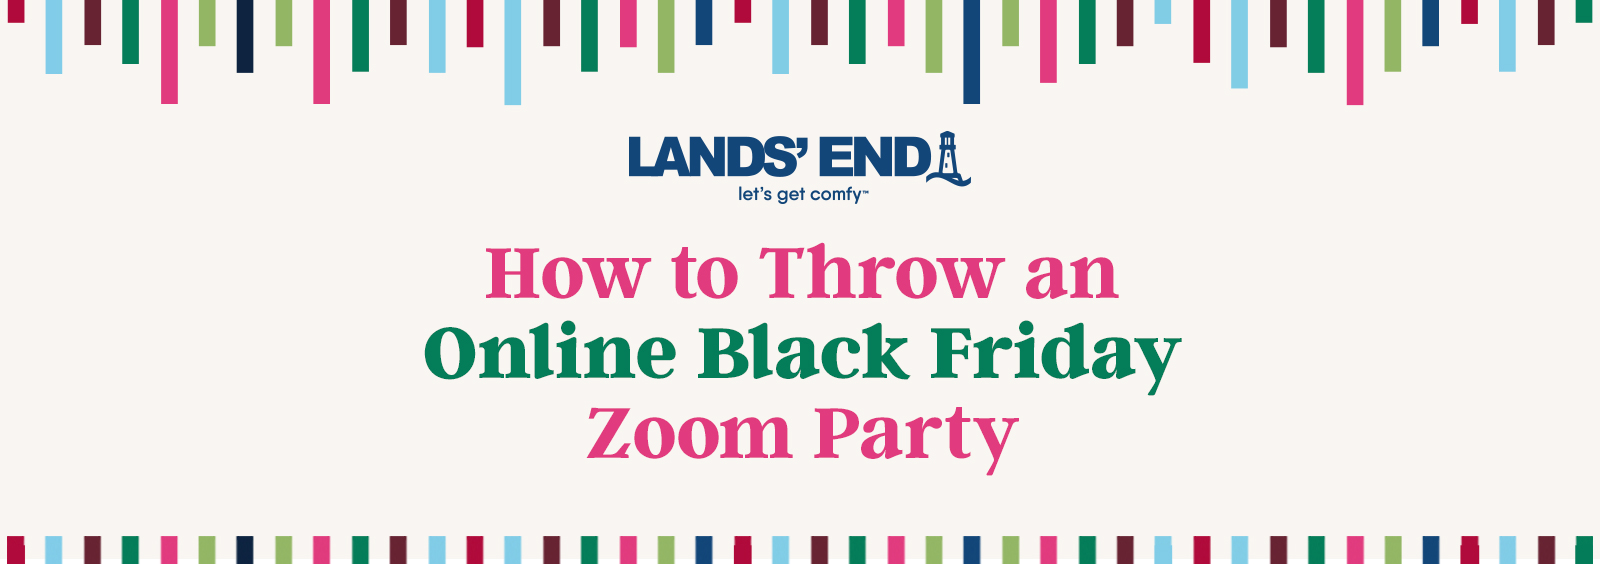 How to Throw an Online Black Friday Zoom Party